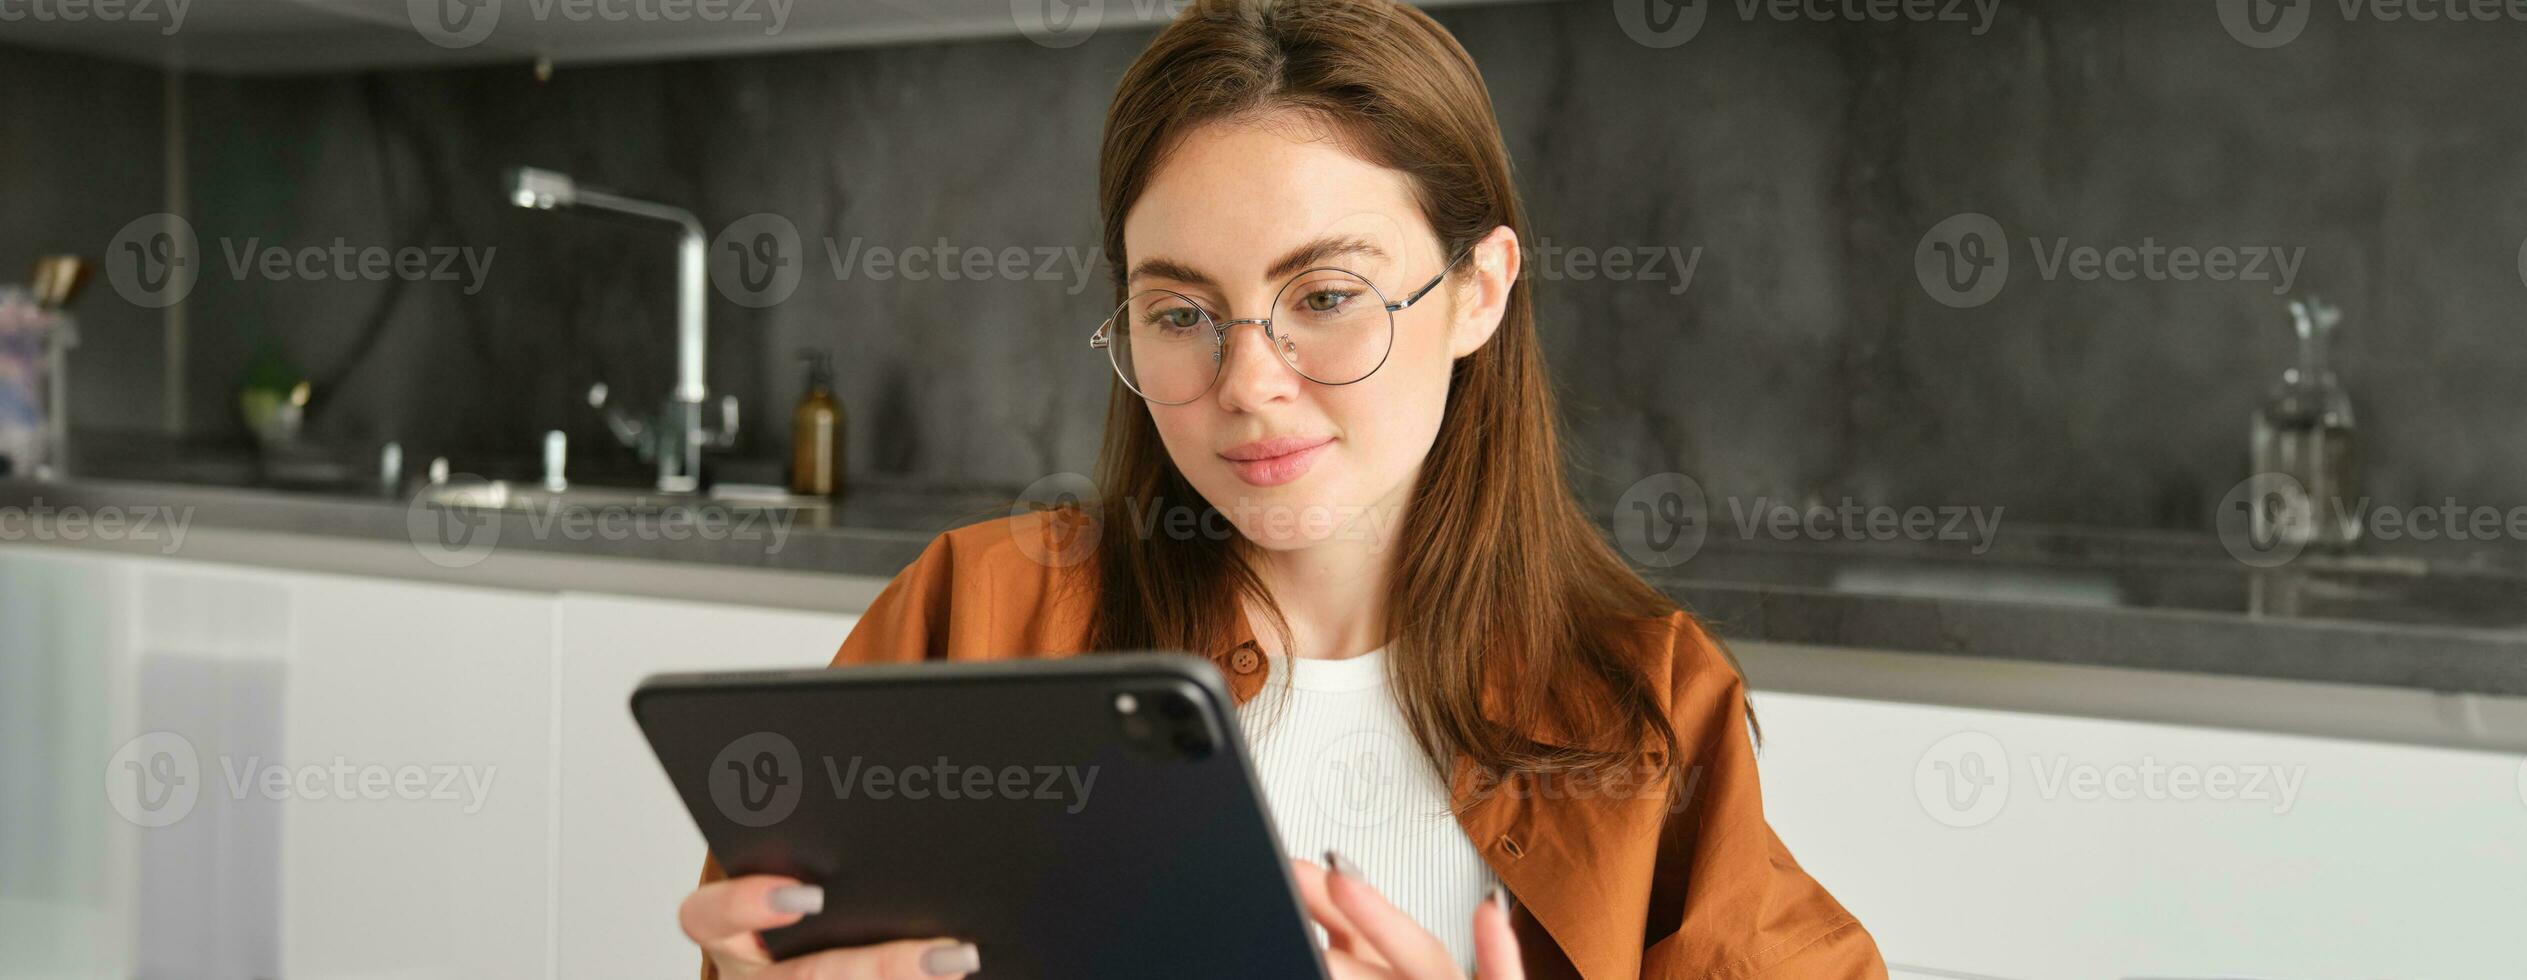 Portrait of busy young woman, self-employed entrepreneur sitting at home with digital tablet, reading documents. Student working on project remotely, holding gadget, studying photo